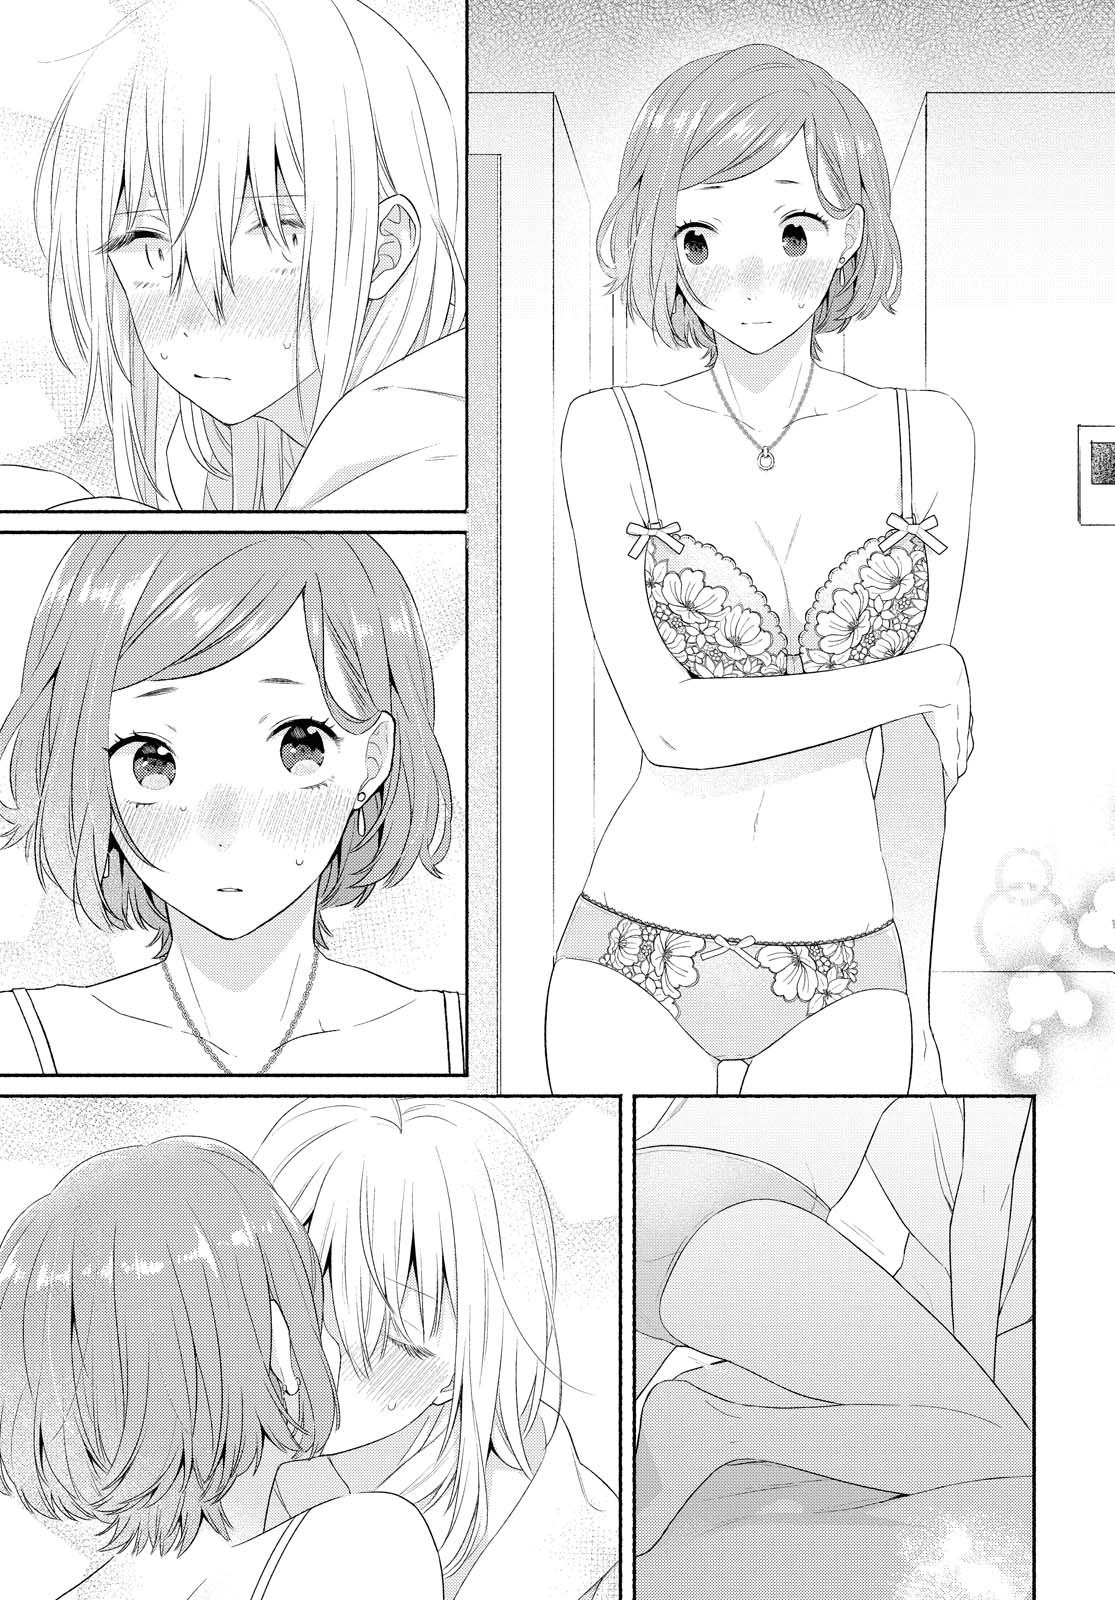 Handsome Girl and Sheltered Girl Ch. 10 Confession